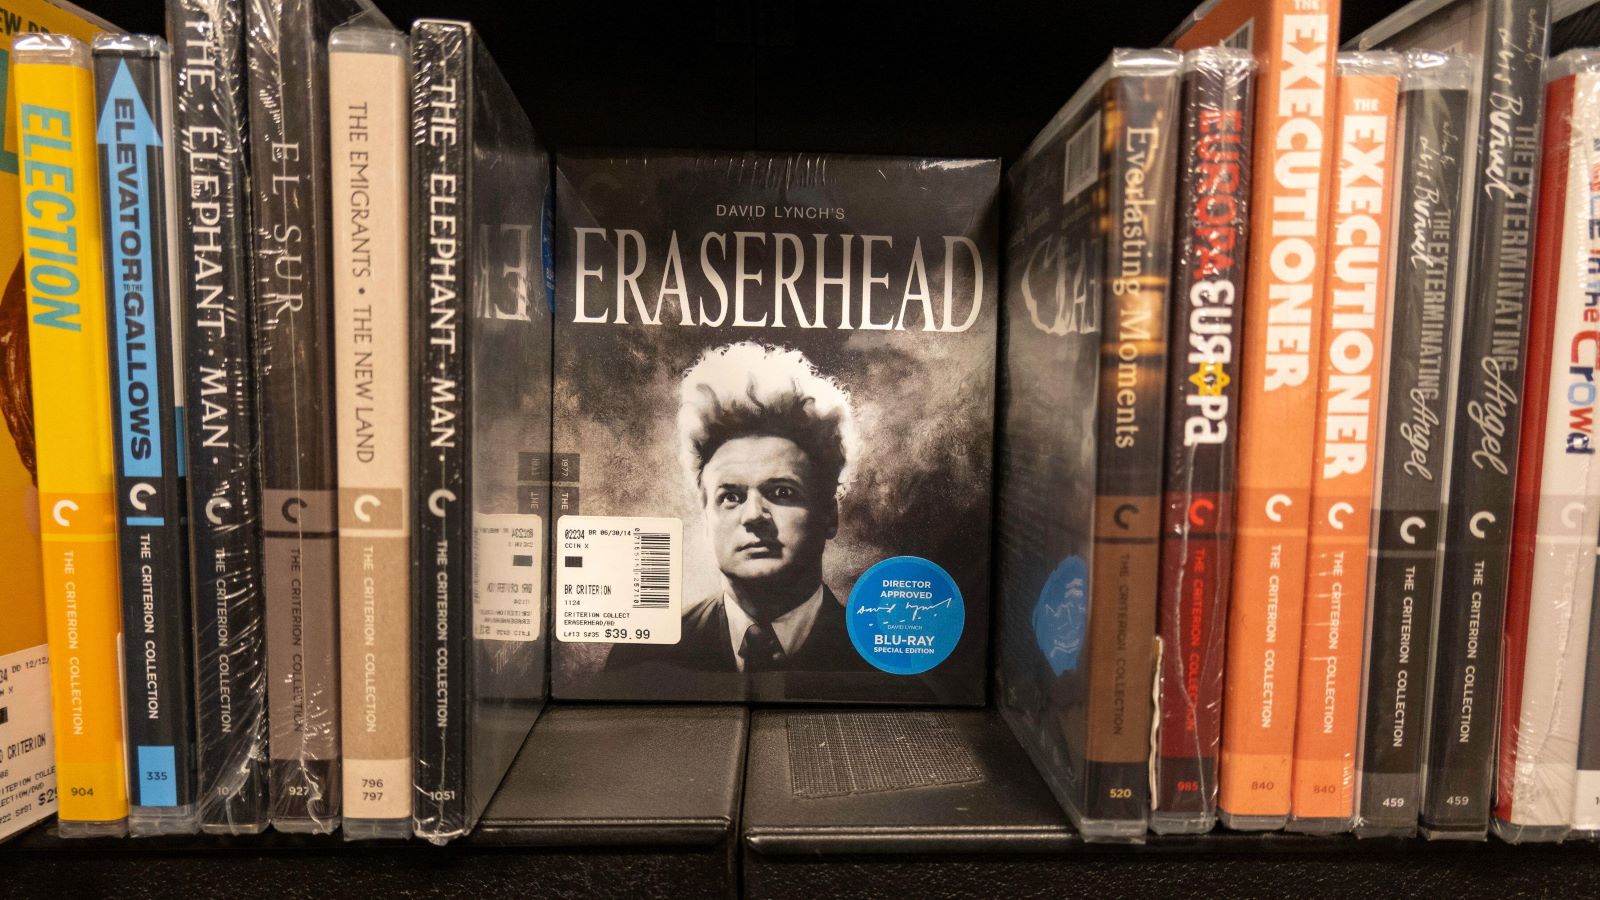 Criterion Collection sale is always a can't miss opportunity